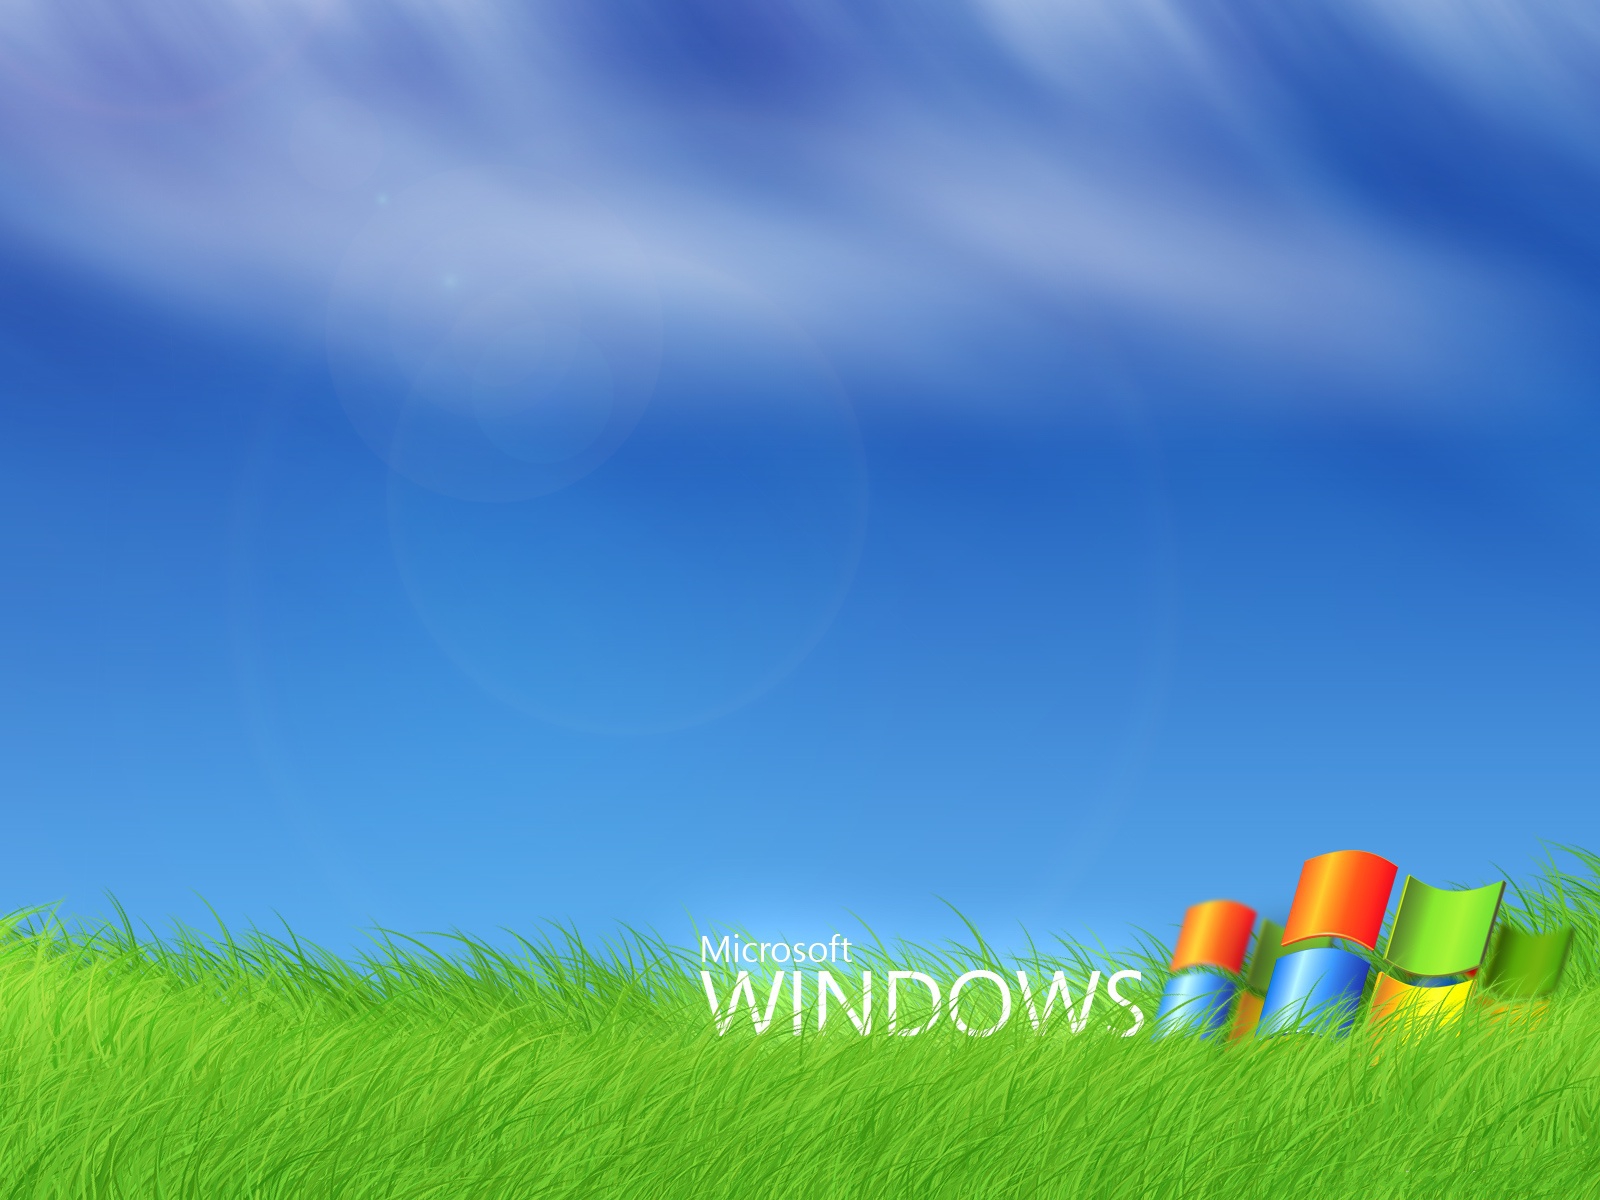 Hd wallpapers for windows